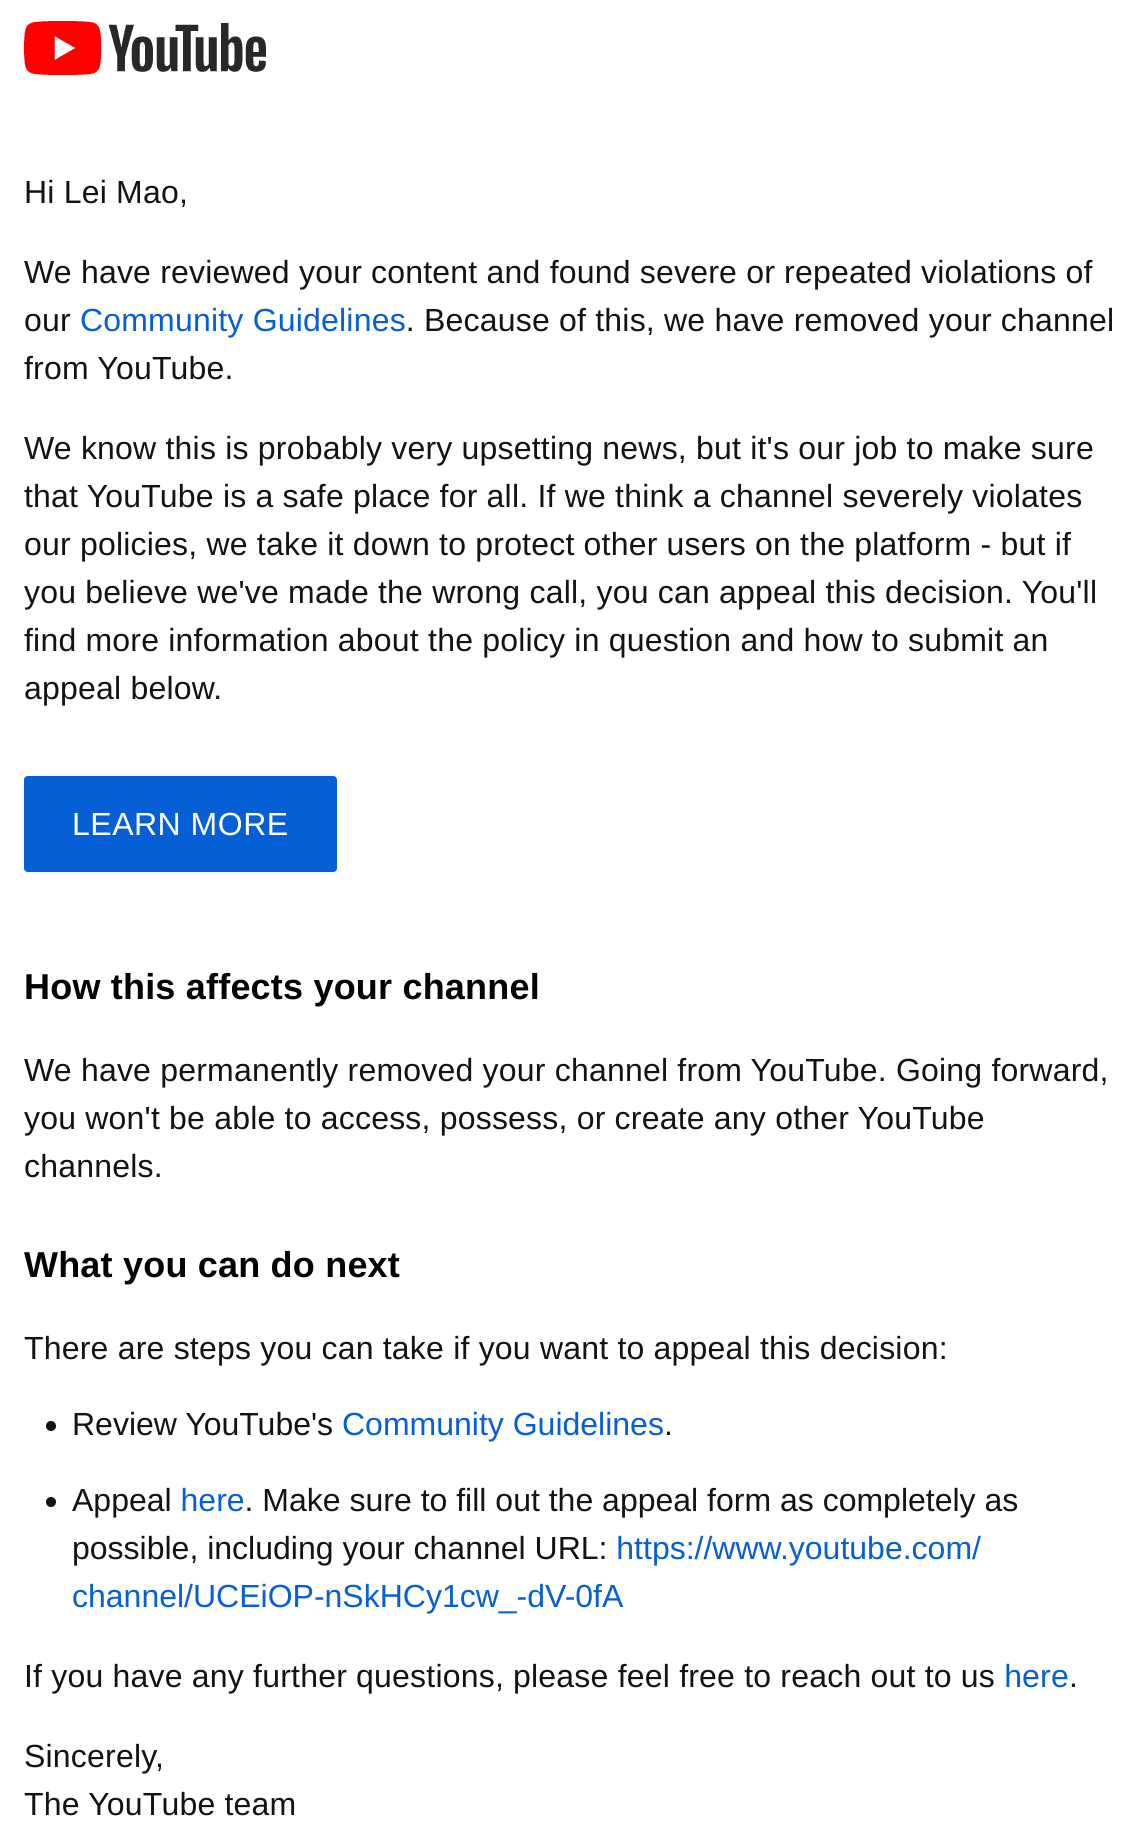 My YouTube Channel Got Removed